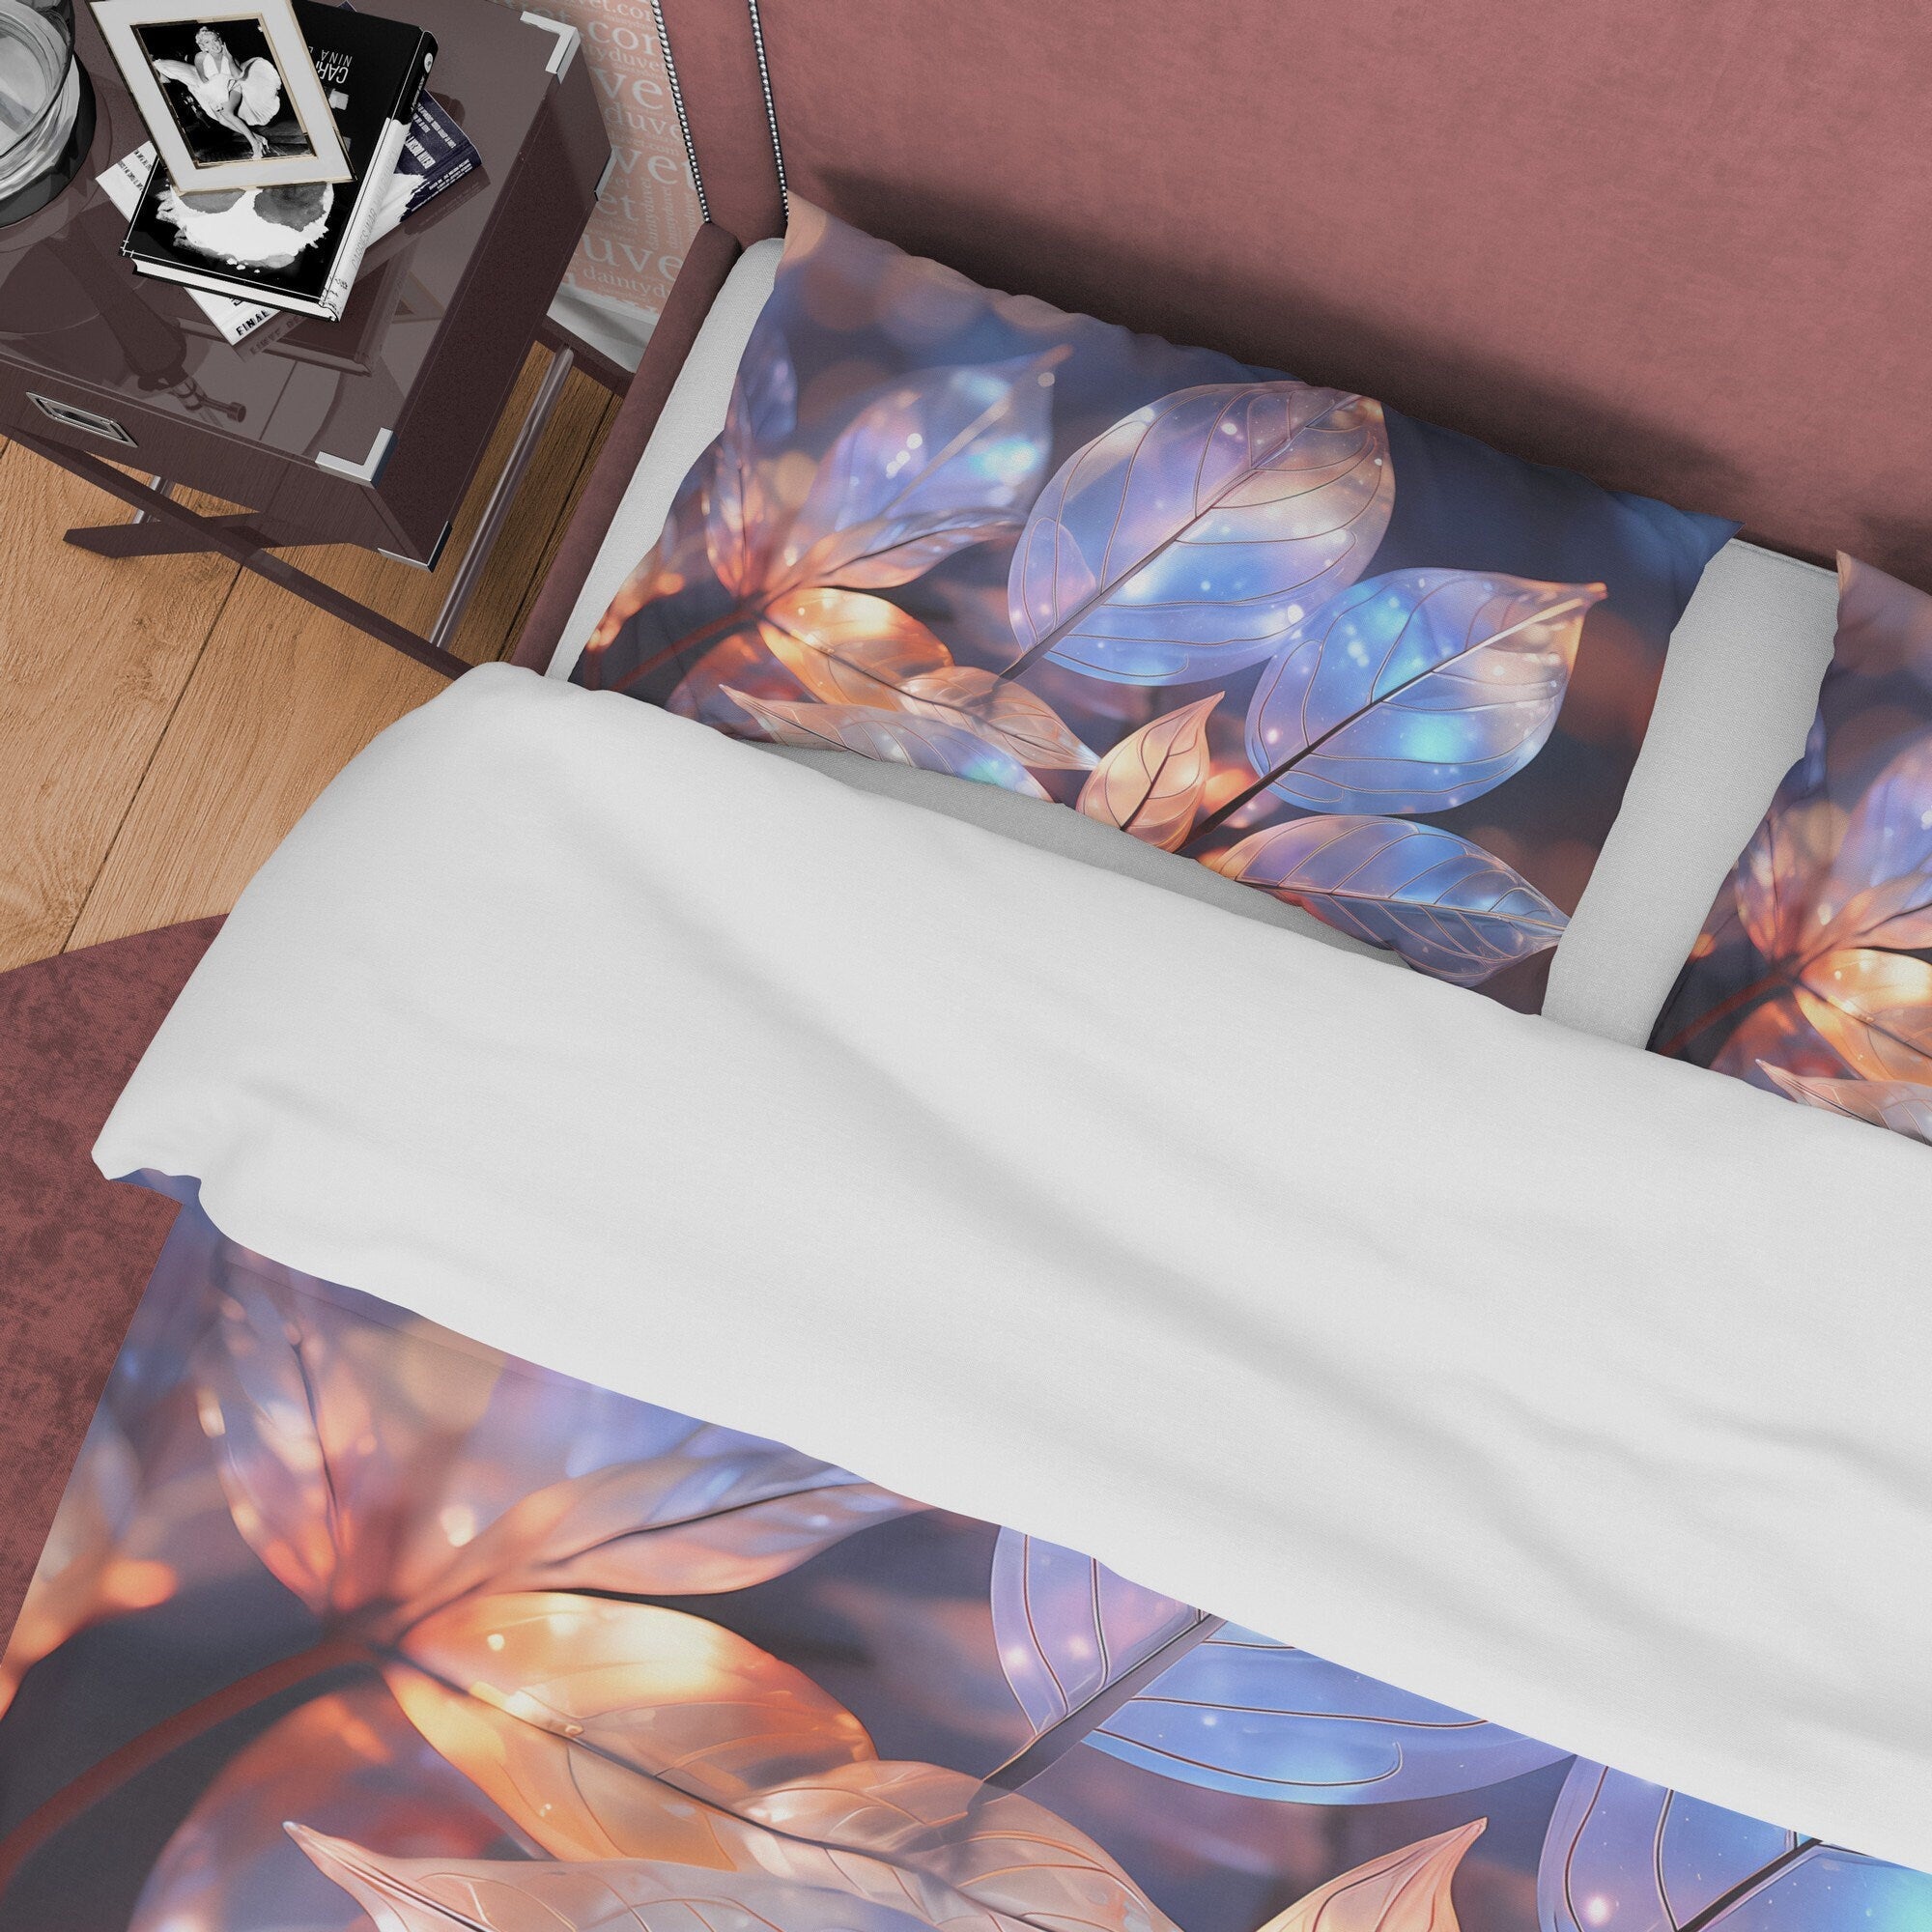 Colorful Plant Holographic Bedding Set Boho Duvet Cover, Leaf Quilt Cover, Galaxy Opal Bed Cover, Moonstone Inspired Bedspread, Pastel Color